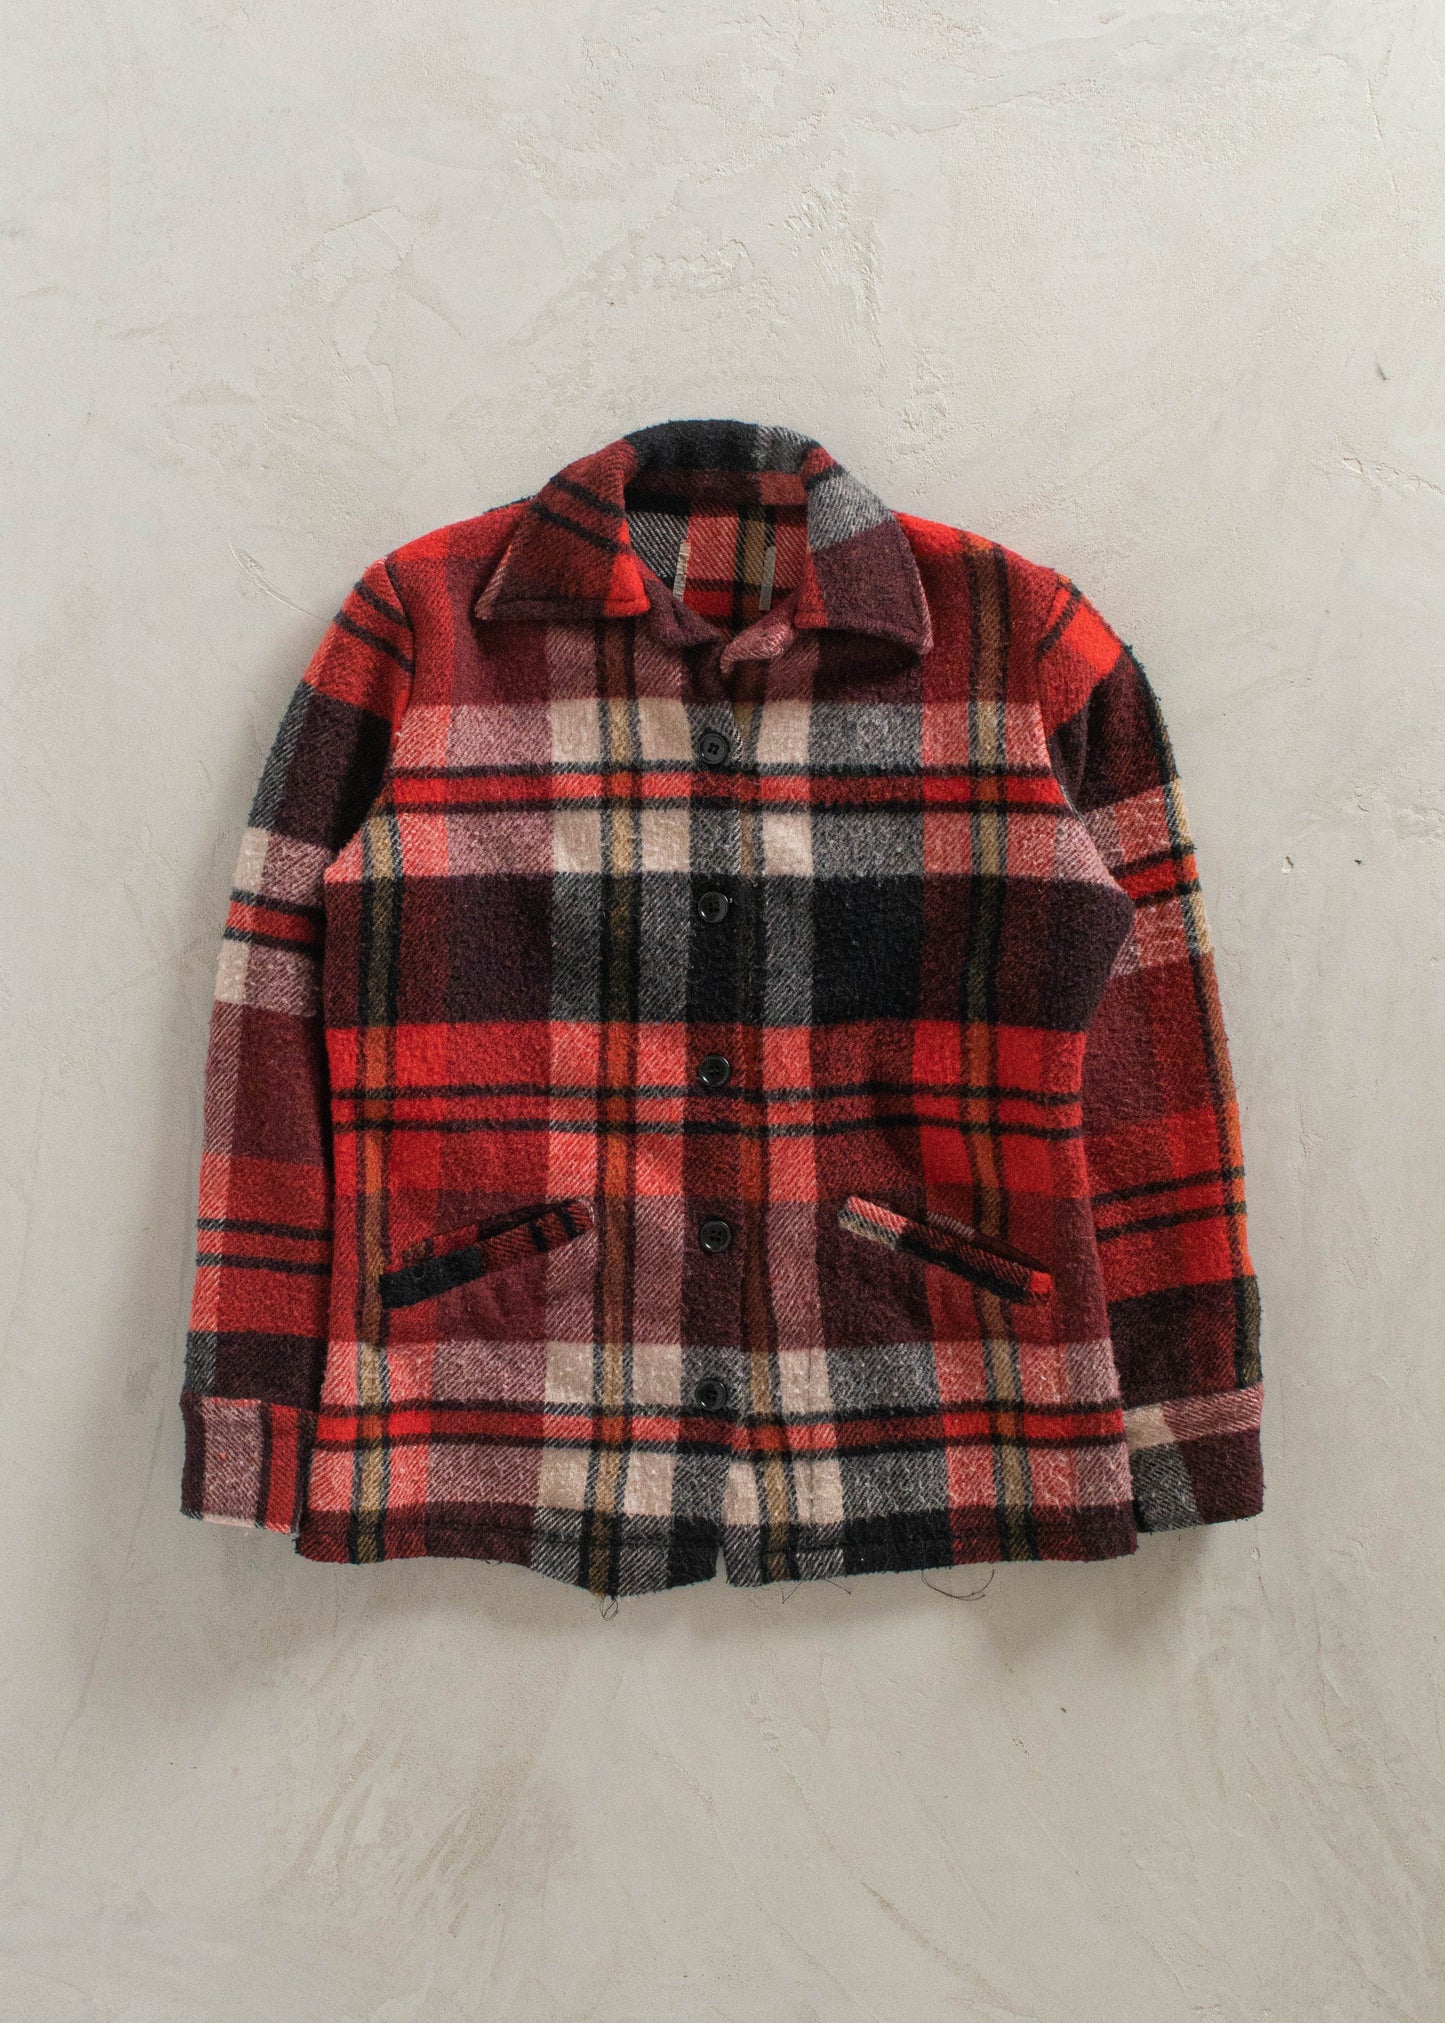 1980s Wool Flannel Button Up Shirt Size XS/S